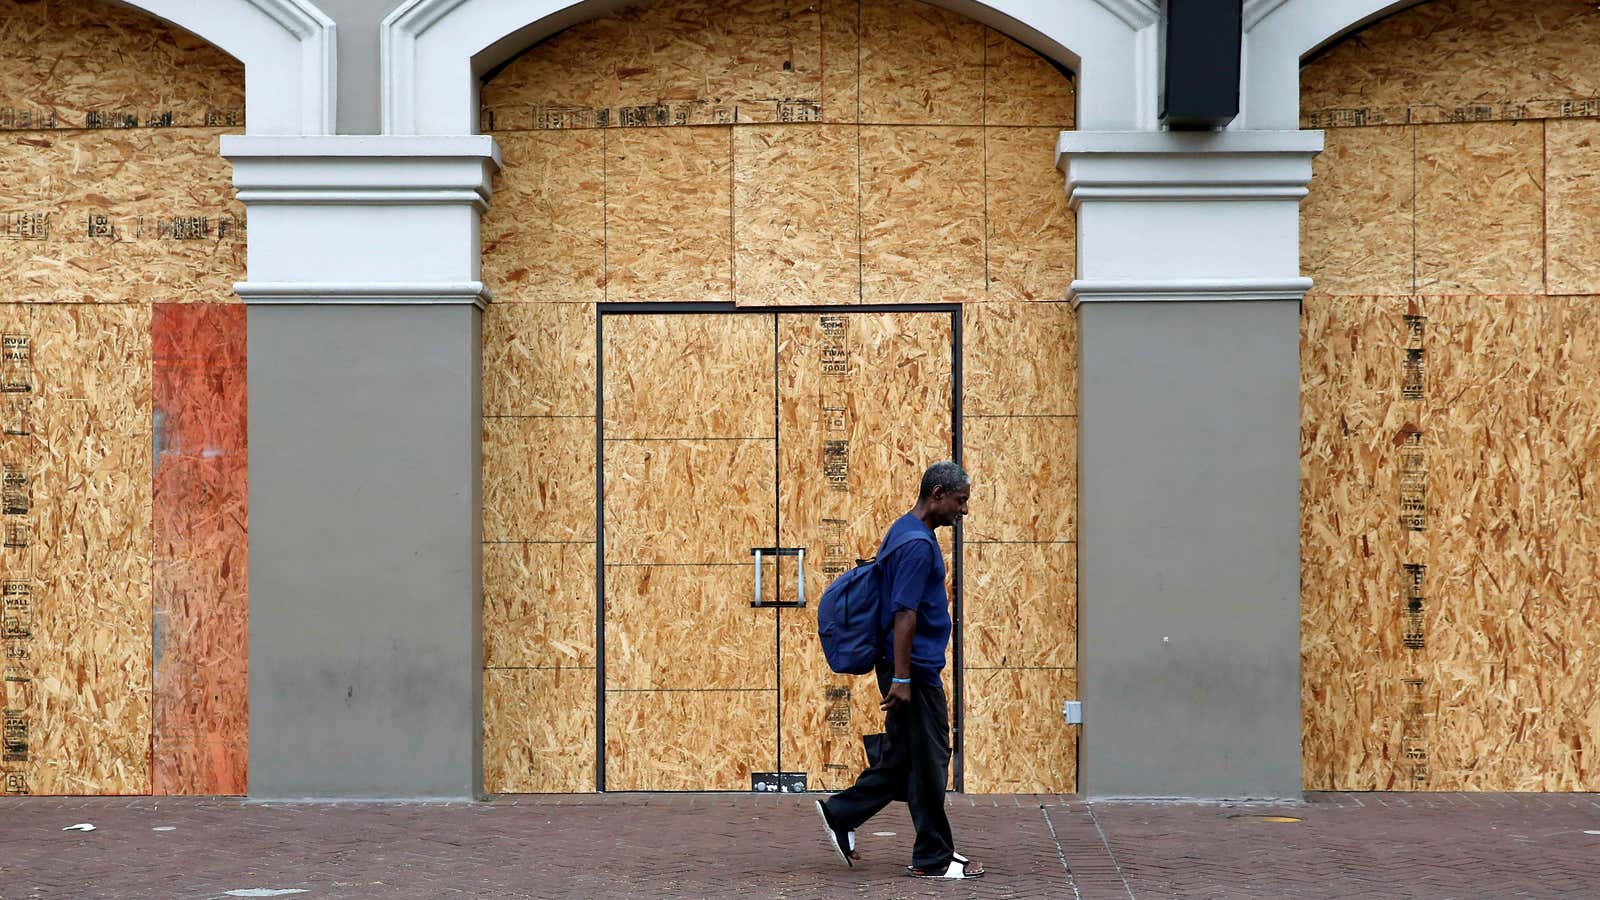 New Orleans, a city with a high concentration of Black residents, has already seen more than its fair share of extreme weather events.